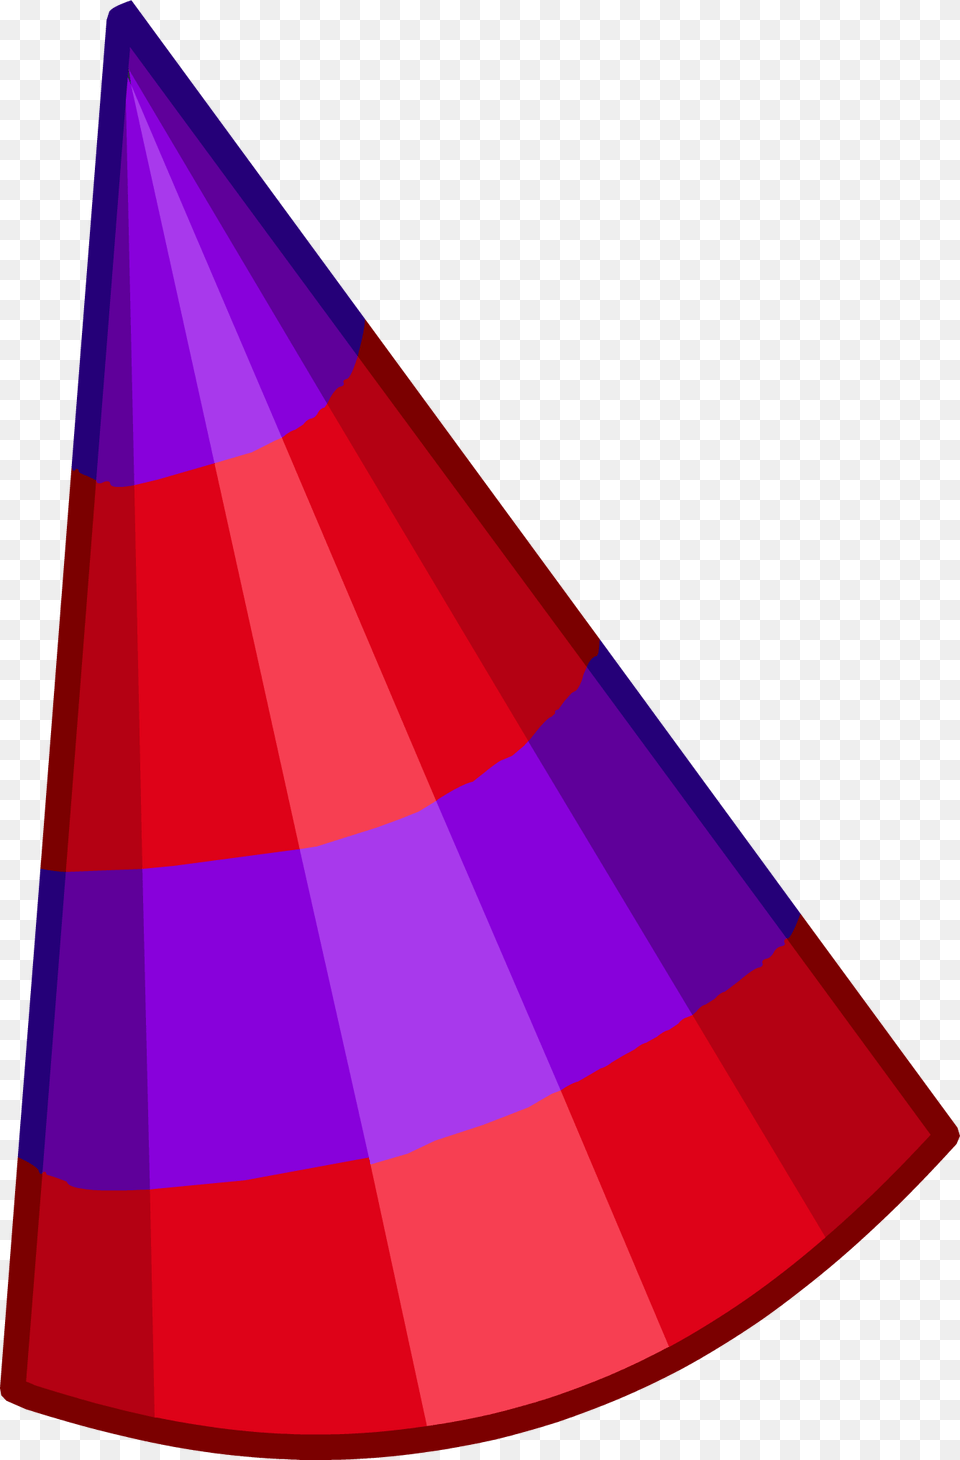 Anniversary Party Hats Club Penguin 9th Anniversary Hat, Clothing, Party Hat Png